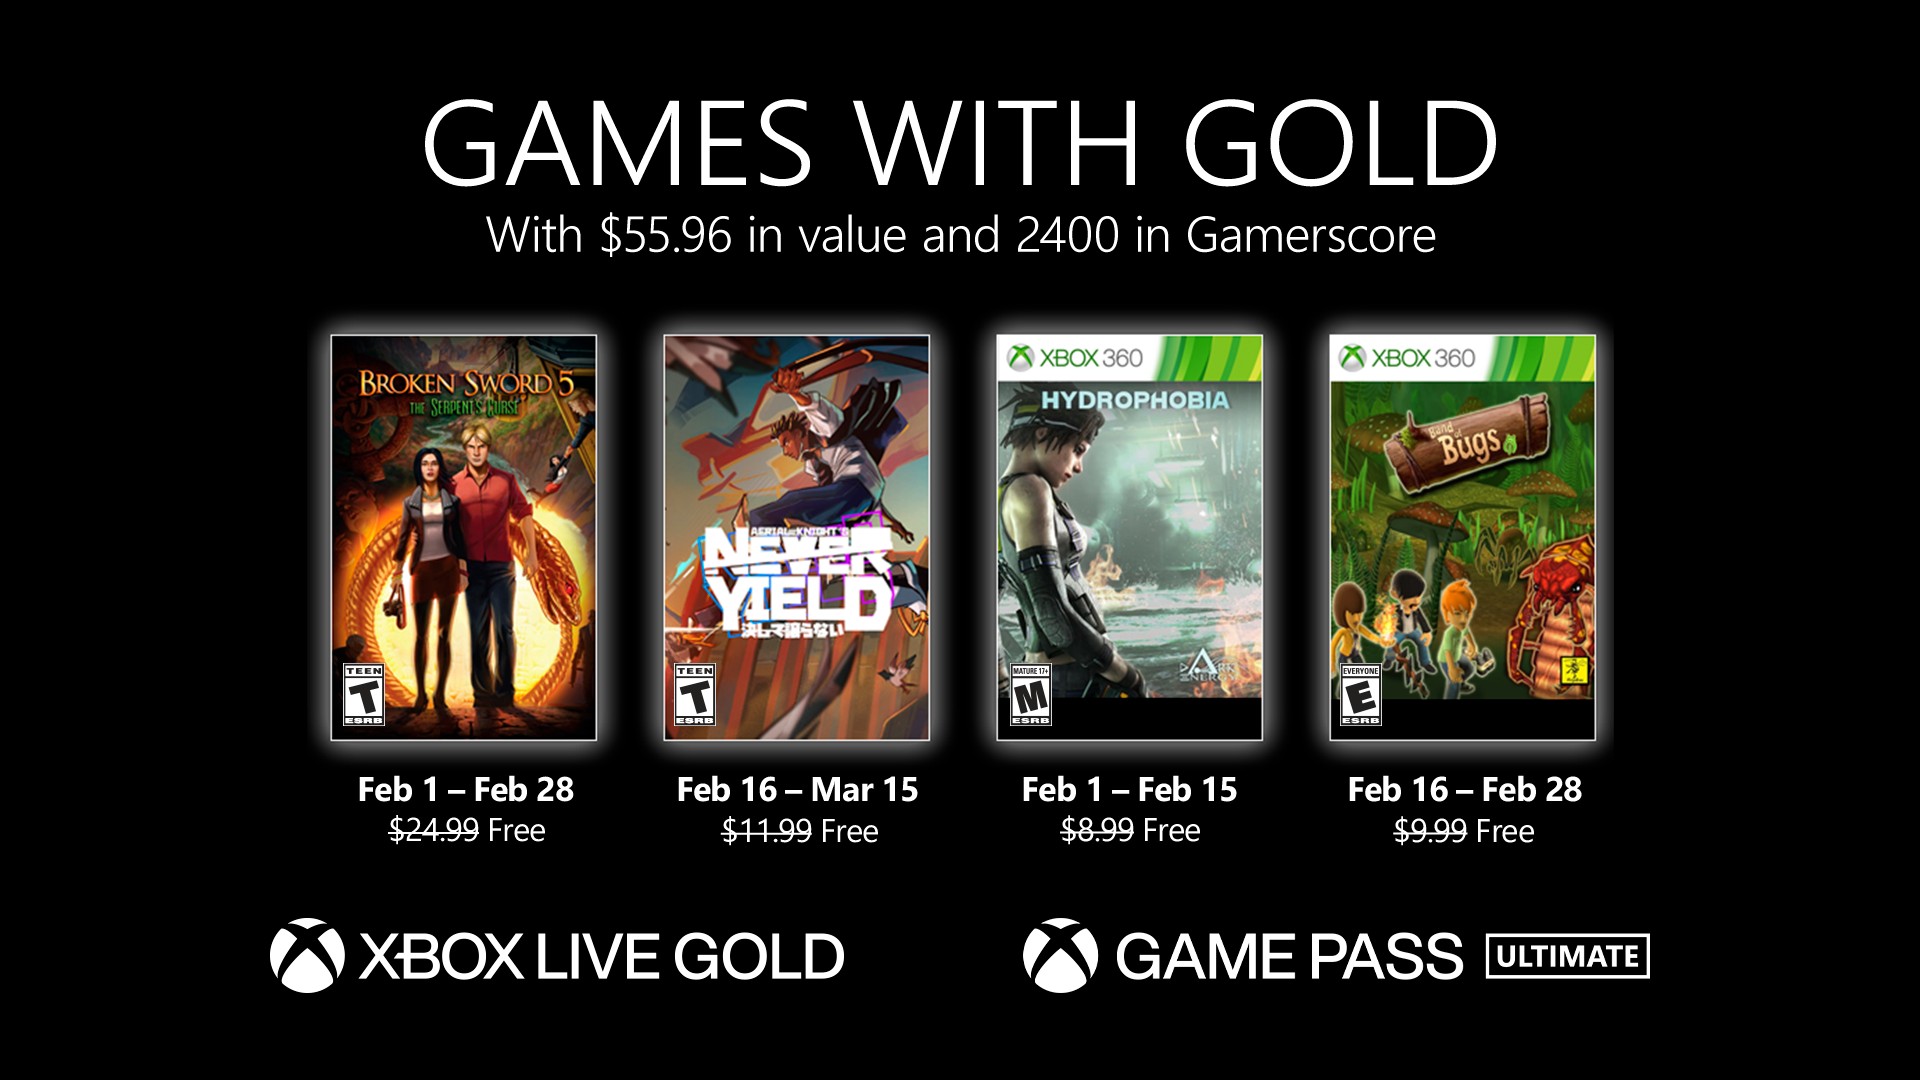 Xbox 360 games with Gold are yours forever, and Xbox One games are not.